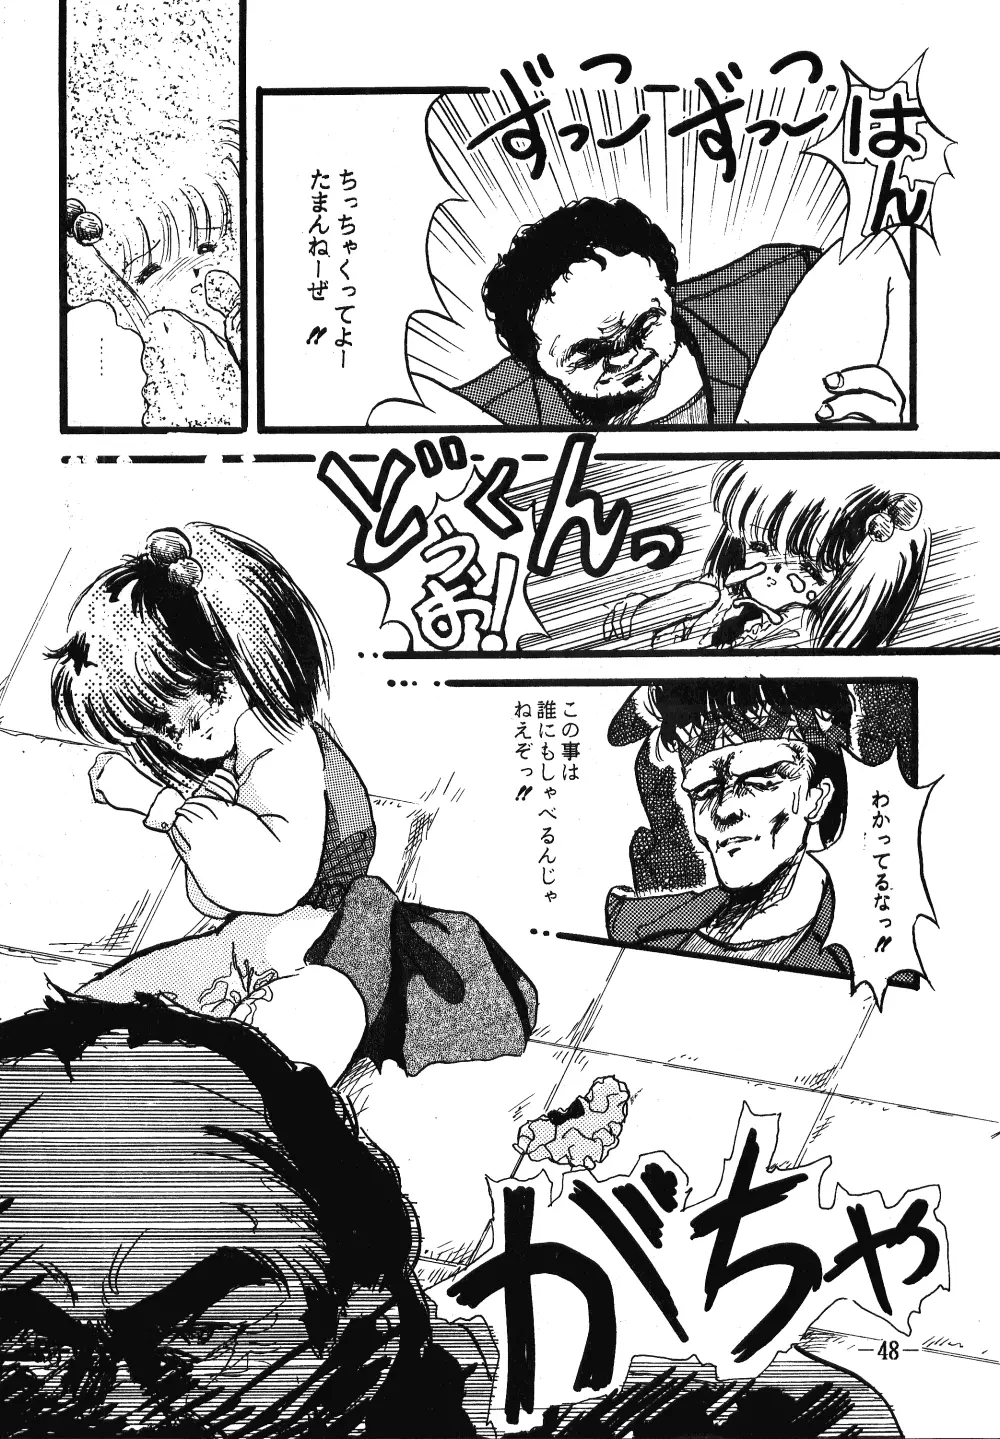 Fro2 Fight Vol. 1 Page.48